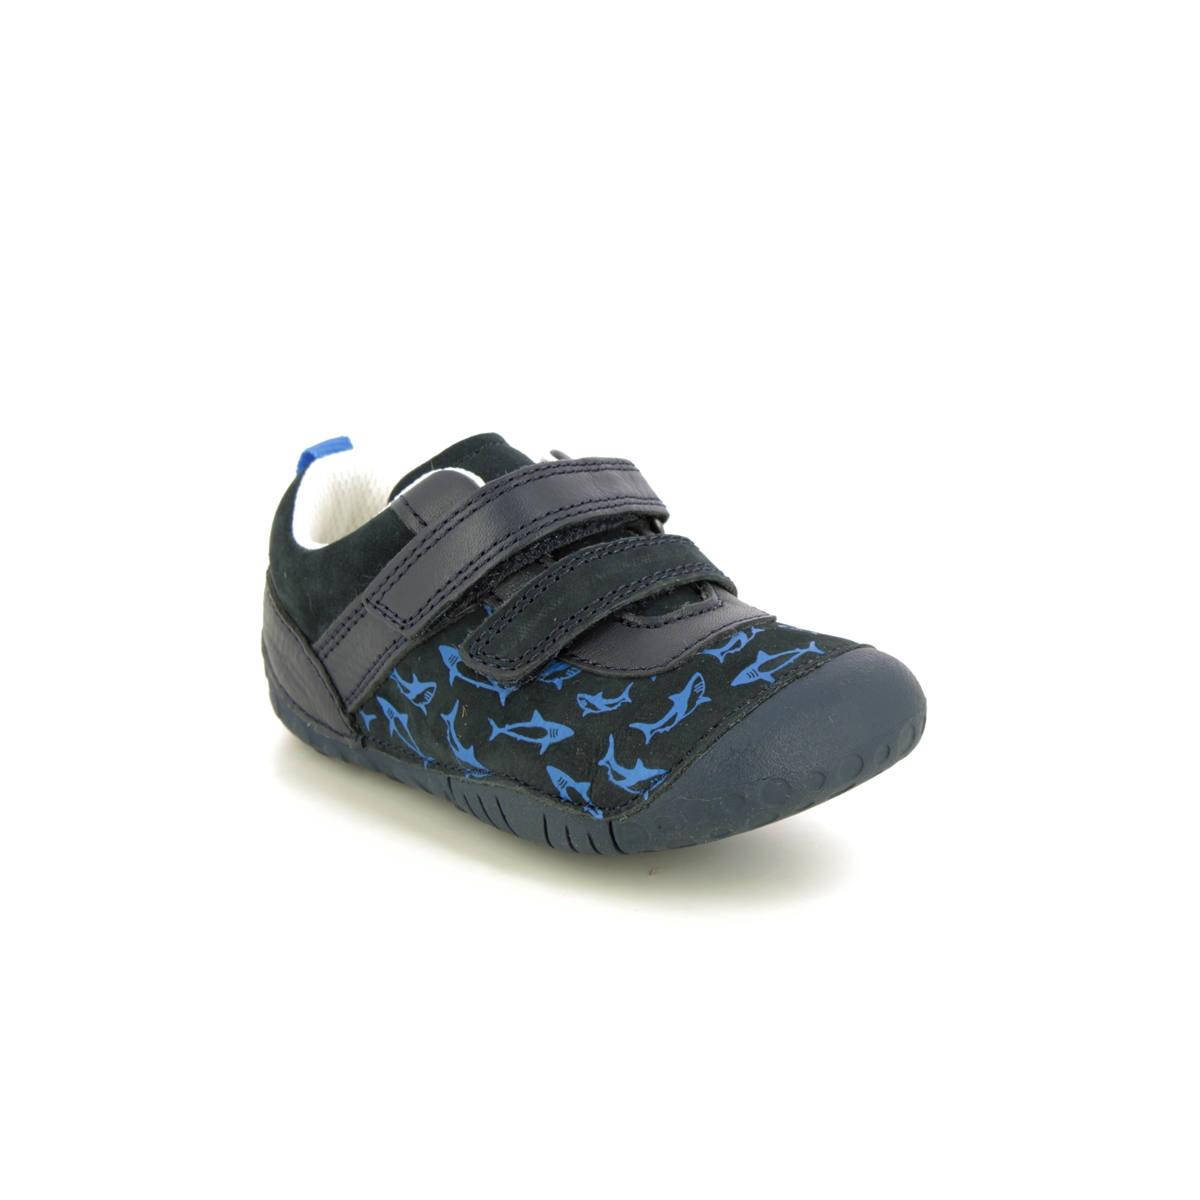 Start Rite Little Fin Navy Leather Kids Boys First Shoes 0777-97G in a Plain Leather in Size 5